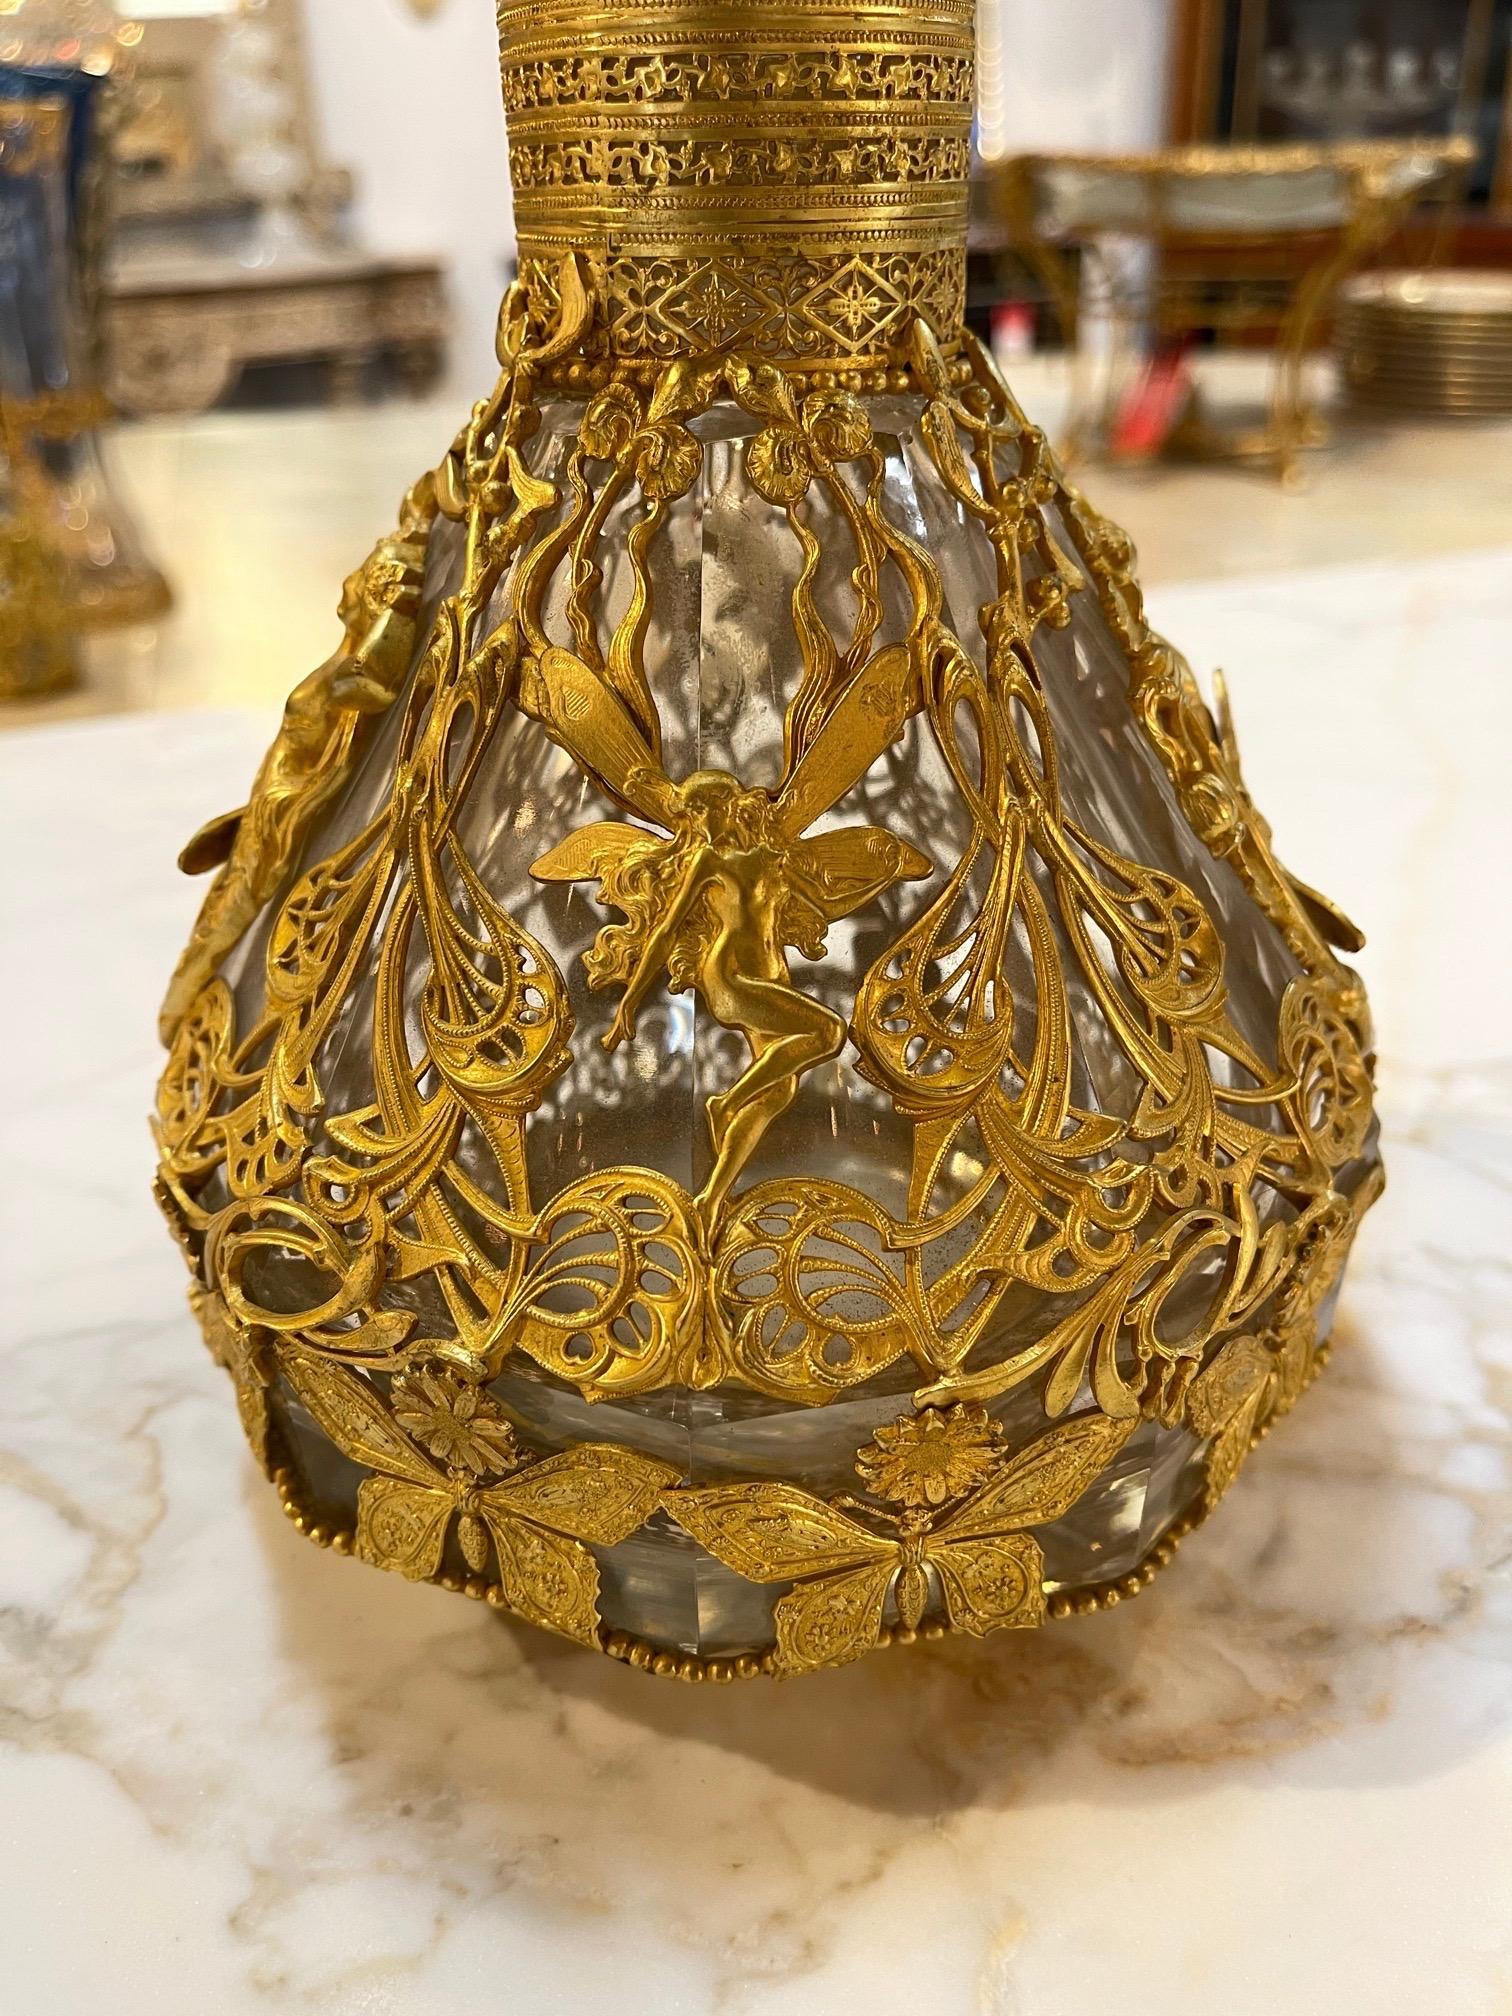 Exceptional 19th century French Baccarat style doré bottle. Beautiful images of a women, dragonfly's and butterflies. Amazing!!